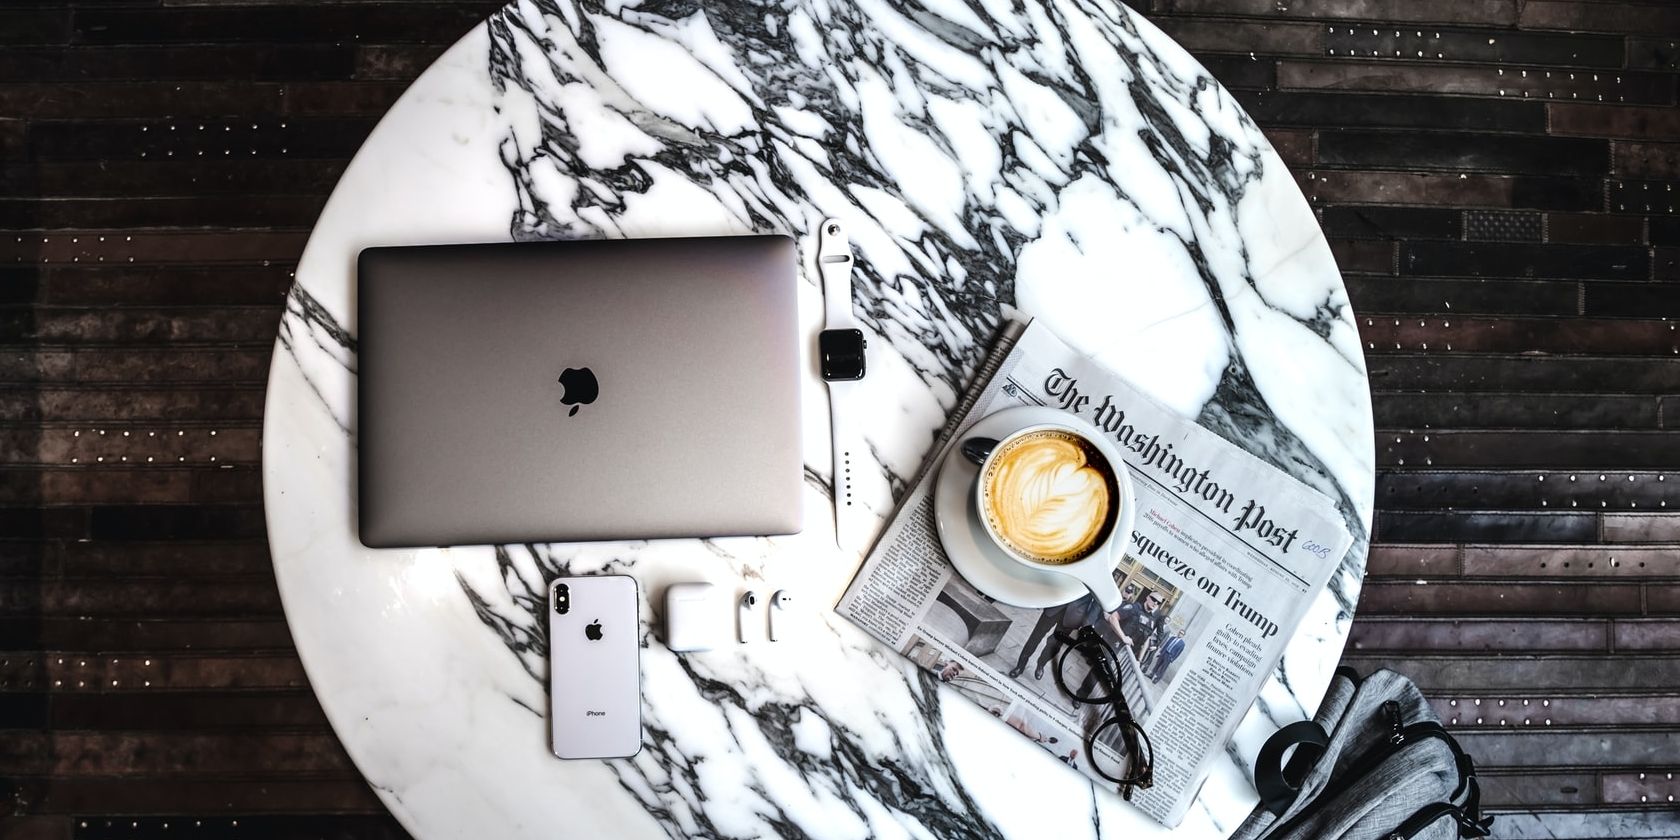 Macbook sitting on round marbled table with a newspaper and other items.